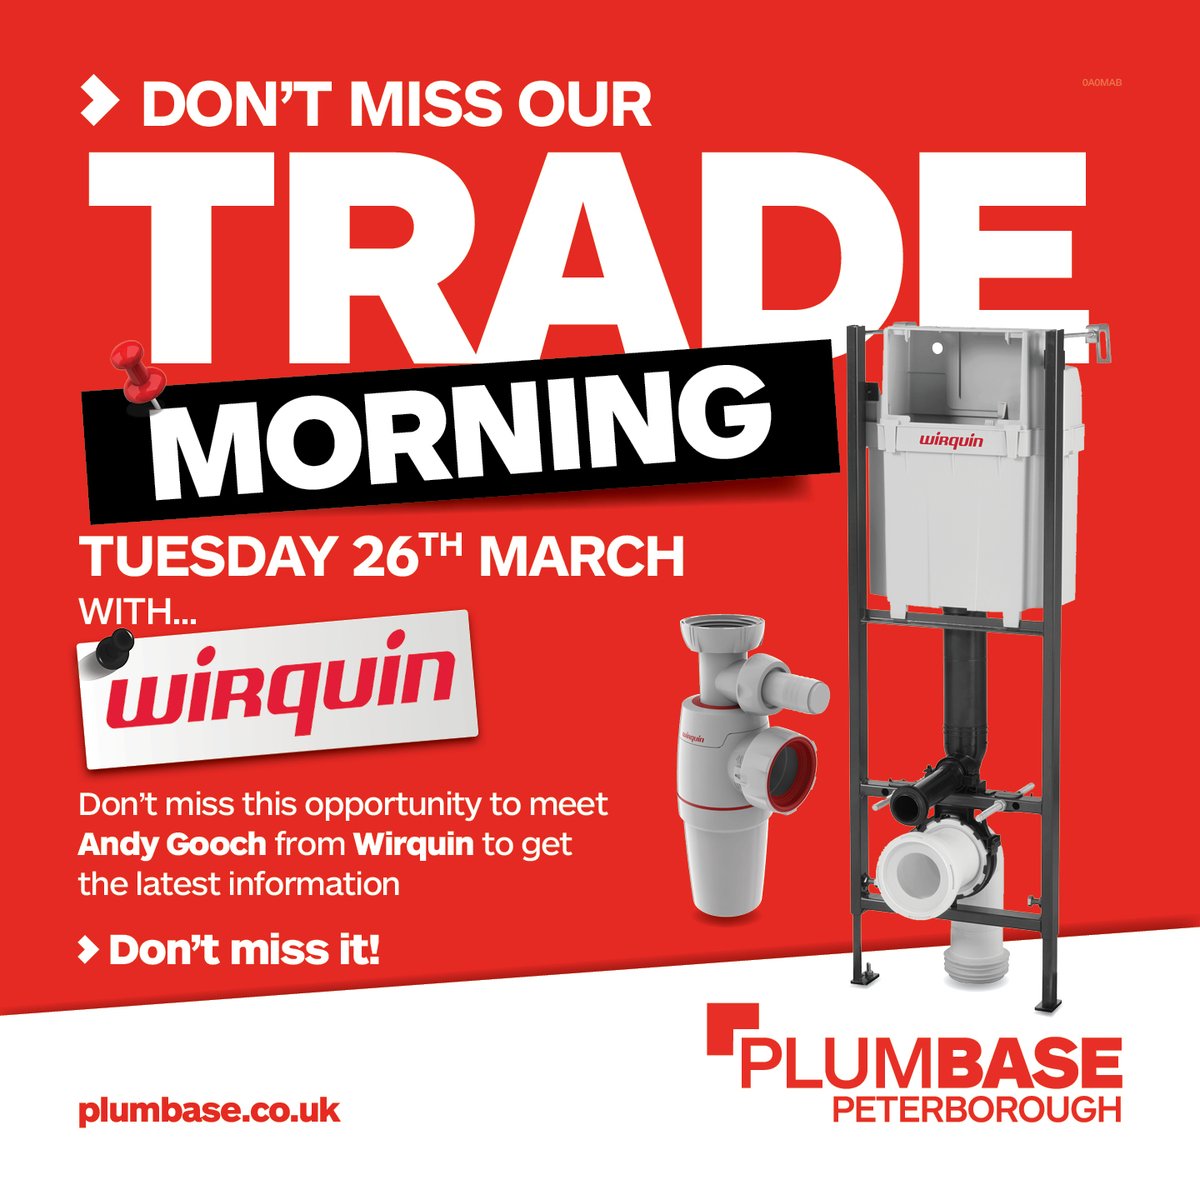 😊Come and meet 👋 Andy Gooch from @Wirquin Ltd for their Trade Morning at Plumbase Peterborough on Tuesday 26th March.👈 #plumbers #plumbersmerchants #plumbasepeterborough